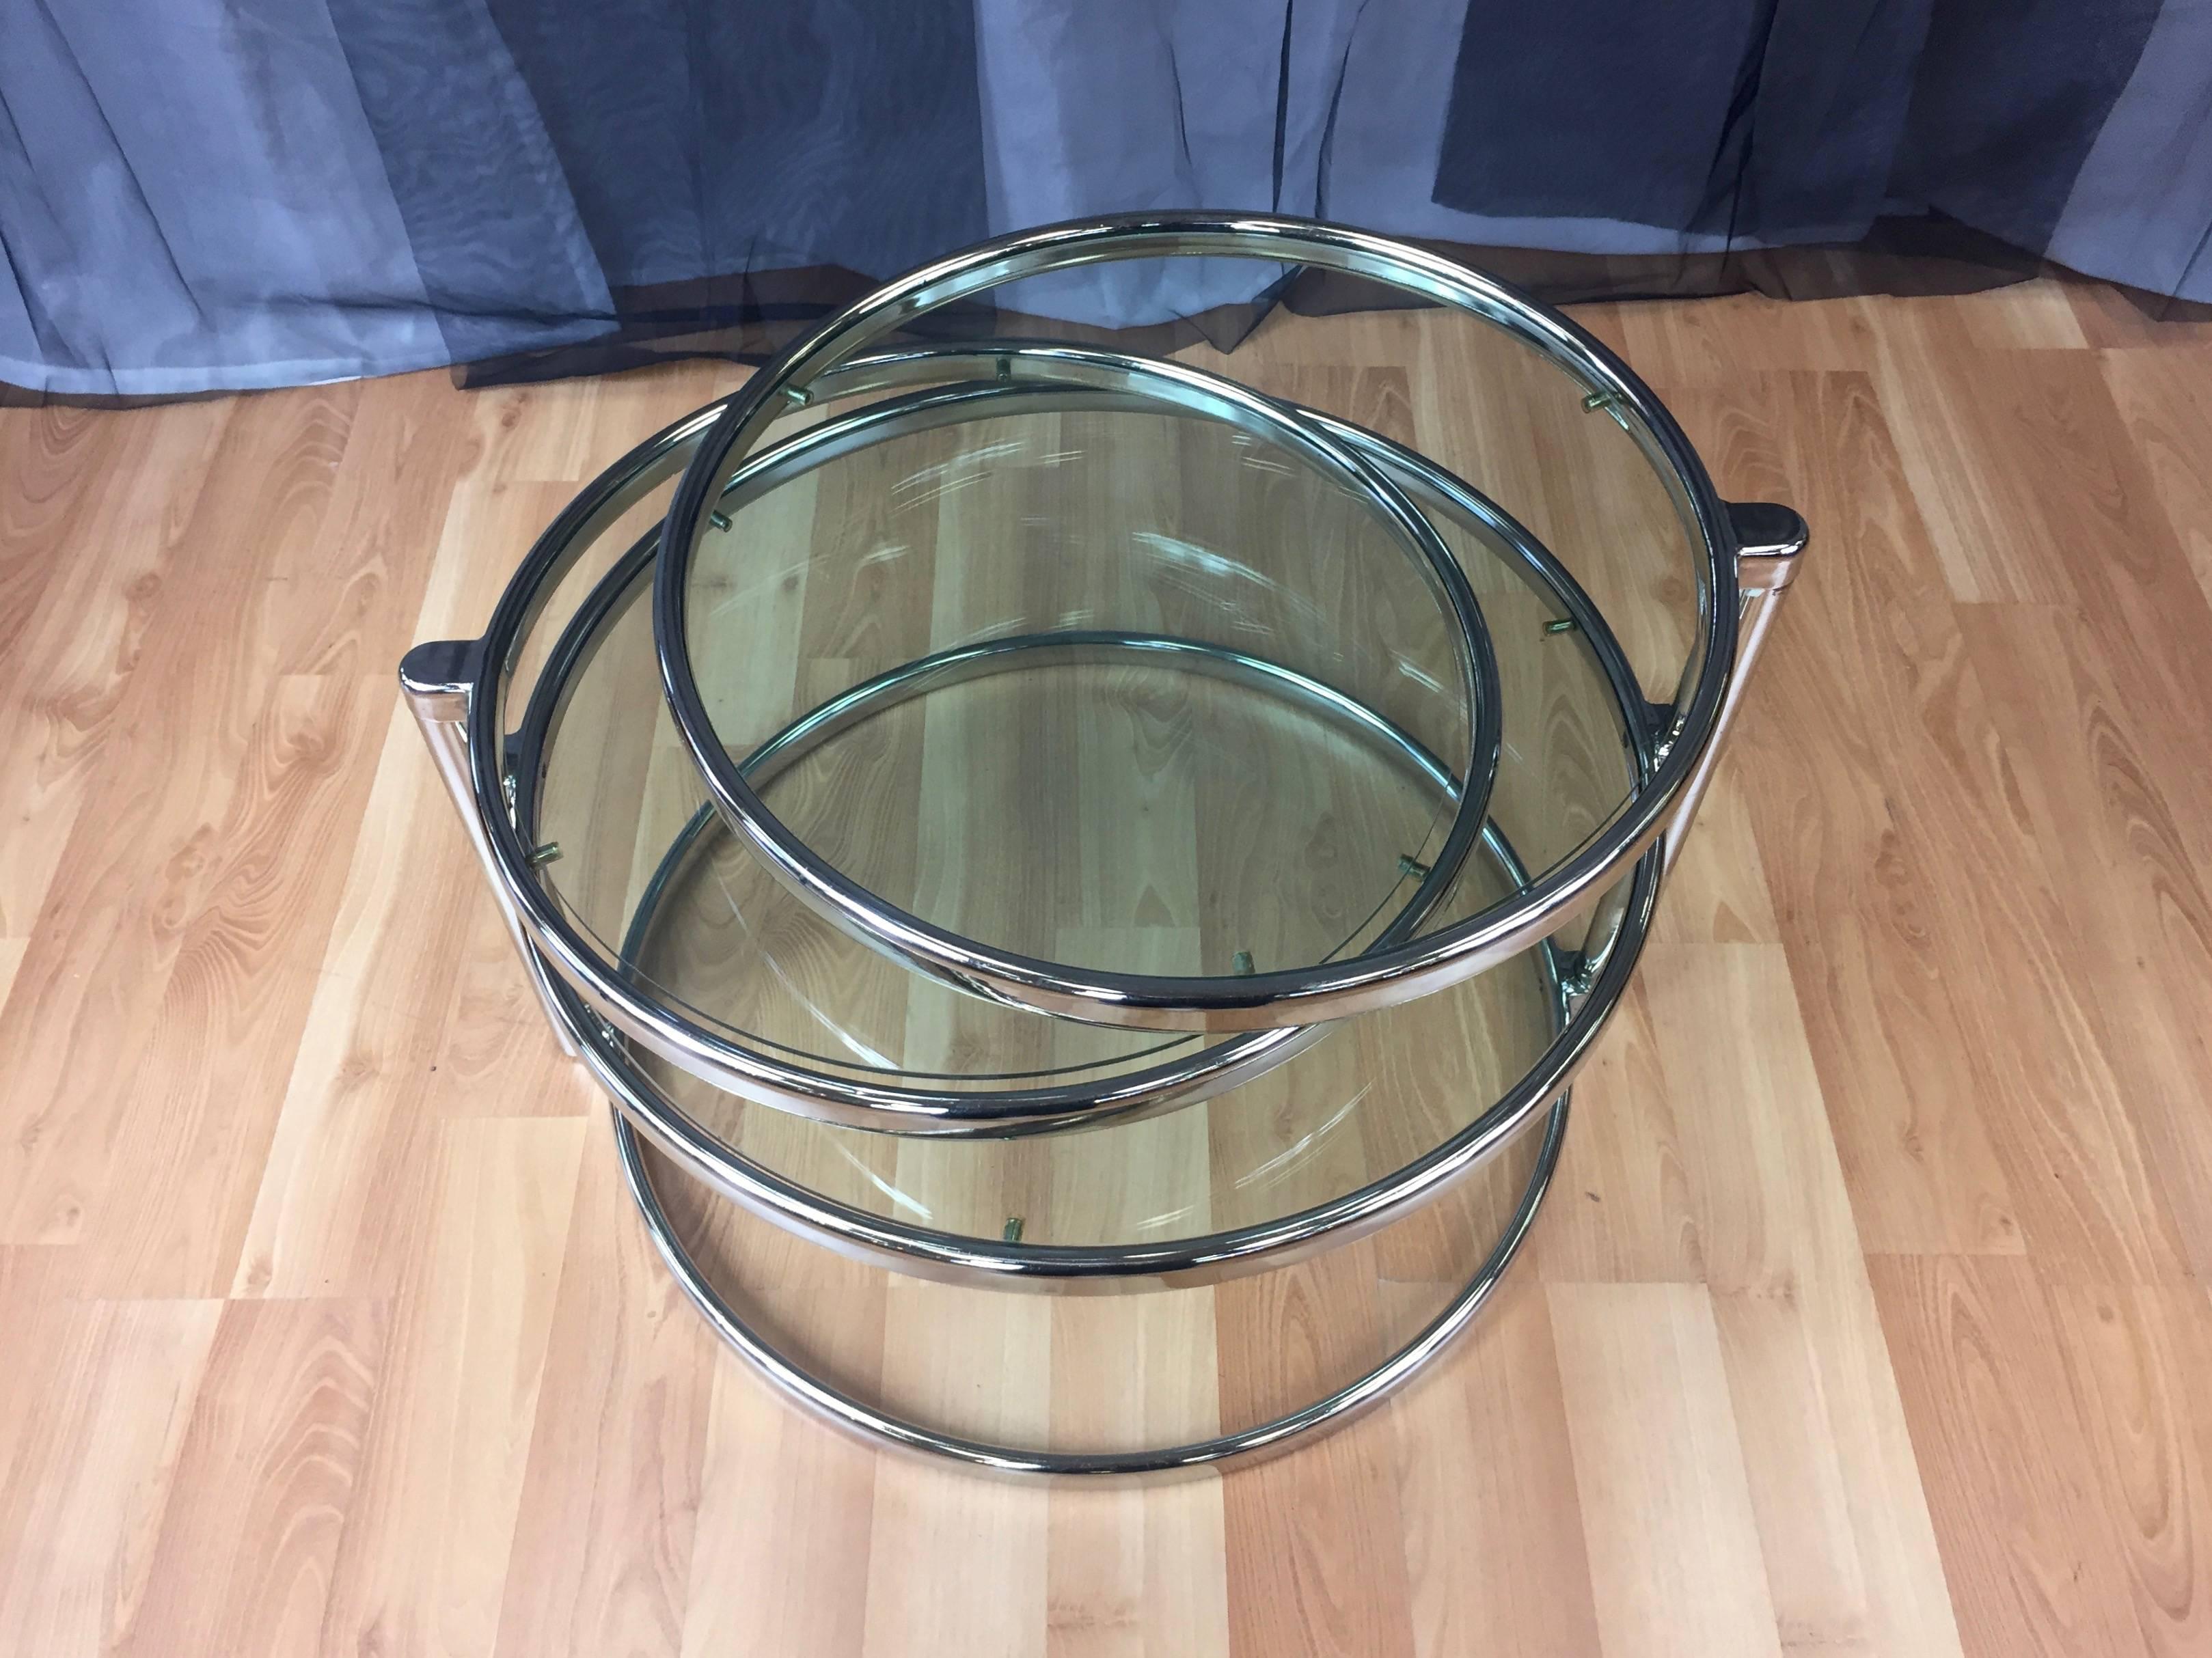 A Milo Baughman-style polished nickel and glass swiveling three-tiered round table.

Comprised of four stacked rings which include an open base, a glass-topped fixed tier and two glass-topped swiveling tiers. Transforms from cocktail table to